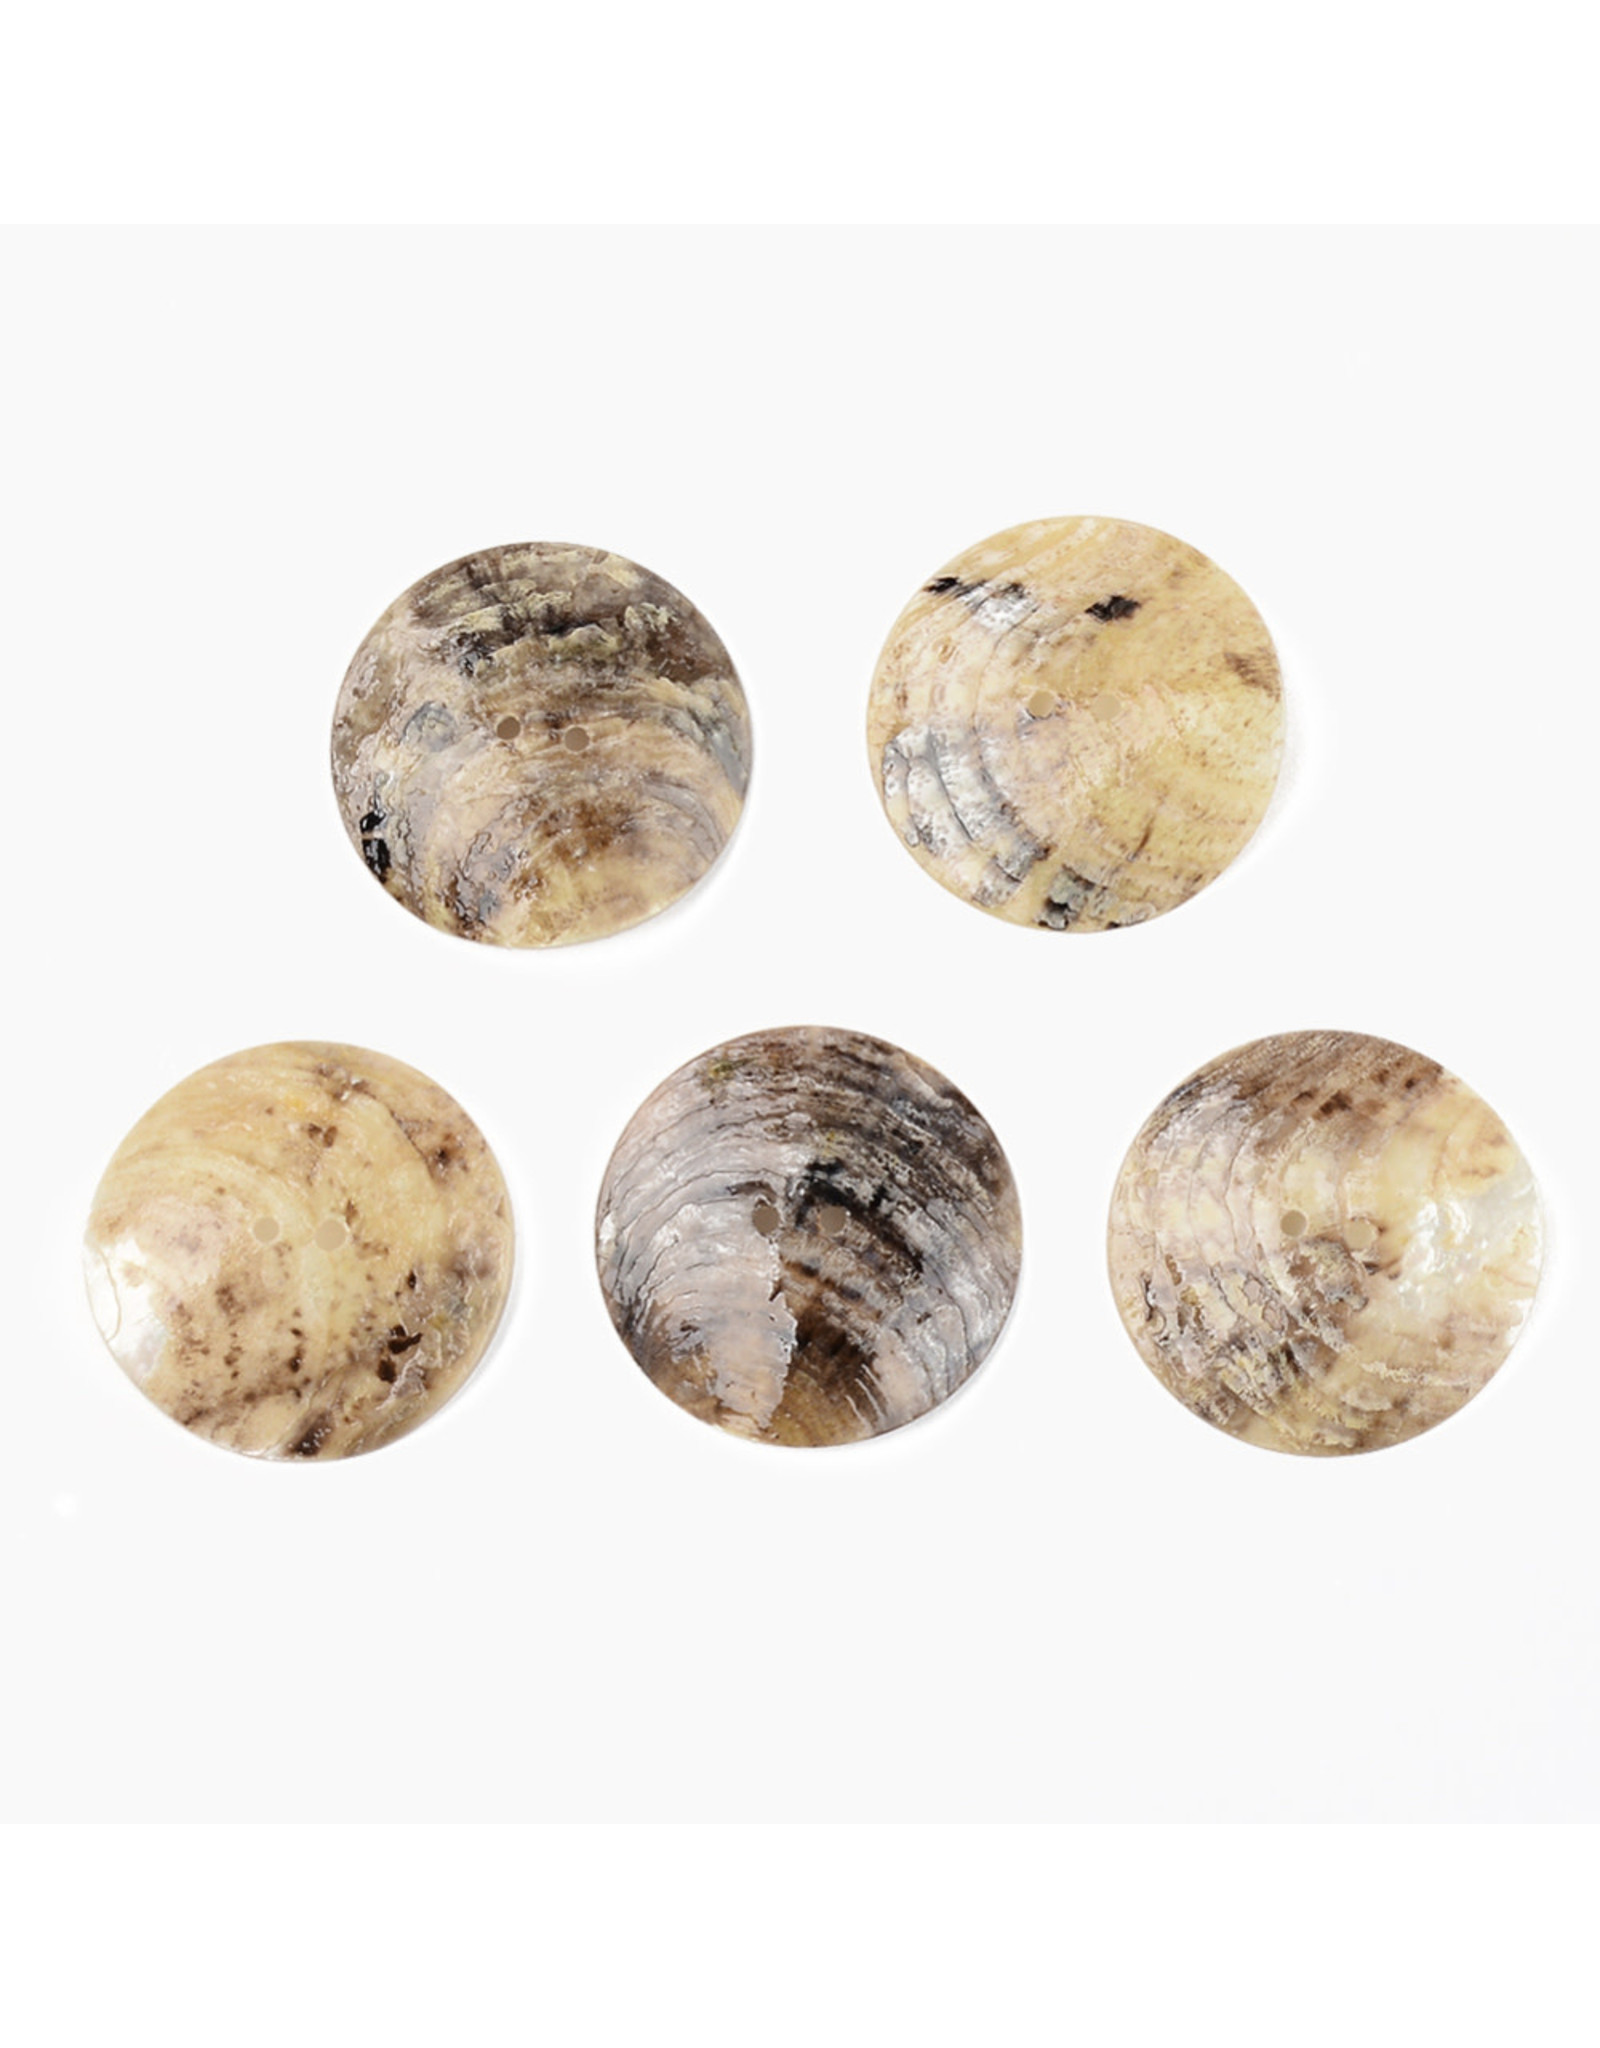 Mother of Pearl Shell Button 30mm x12